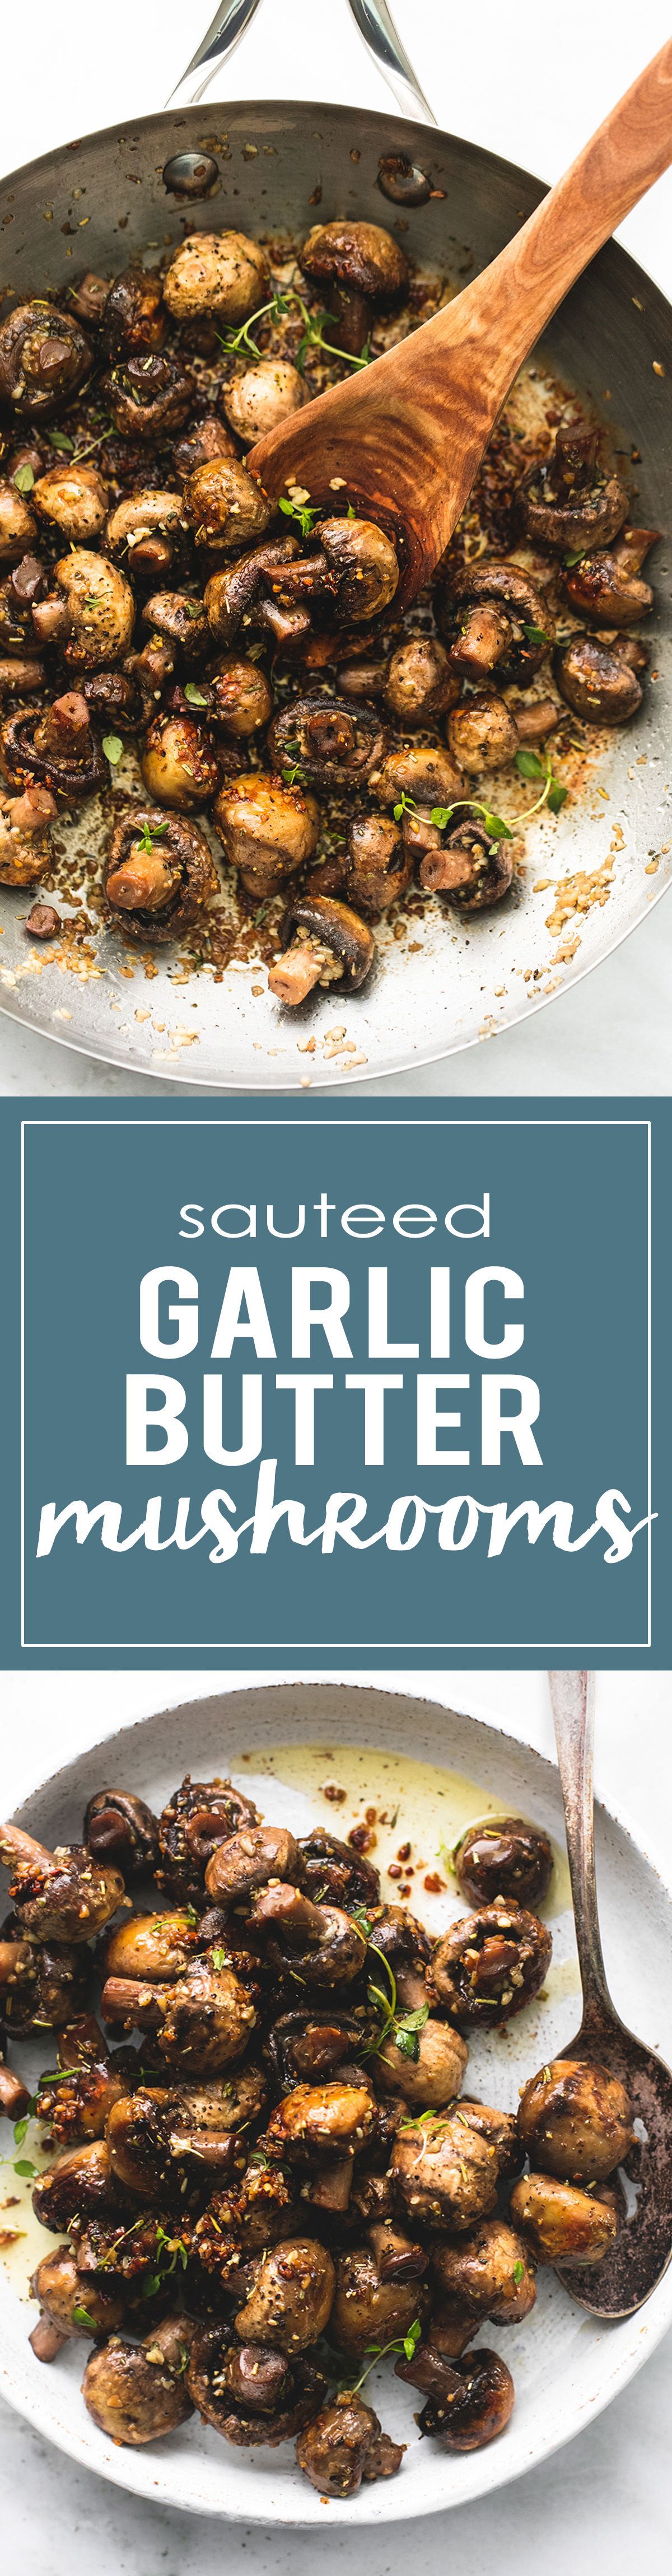 Sauteed Garlic Butter Mushrooms – Quick and easy 15-minute sautéed garlic butter mushrooms are bursting with flavor and make the